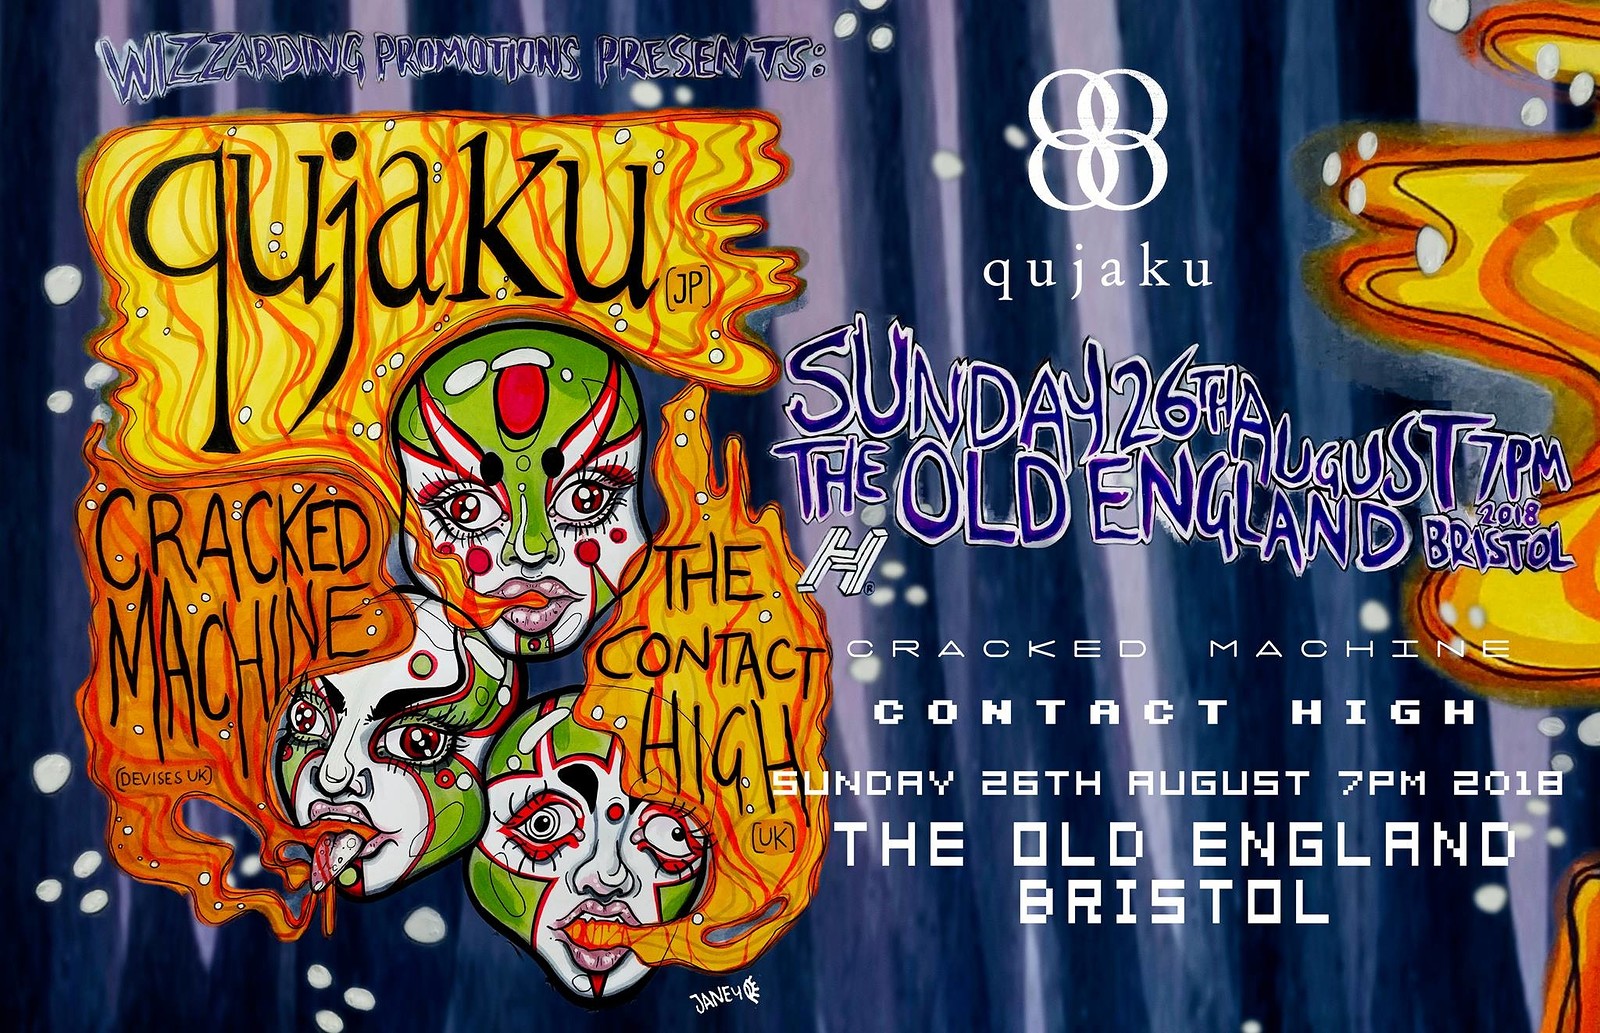 Qujaku // Cracked Machine // The Contact High at The Old England Pub